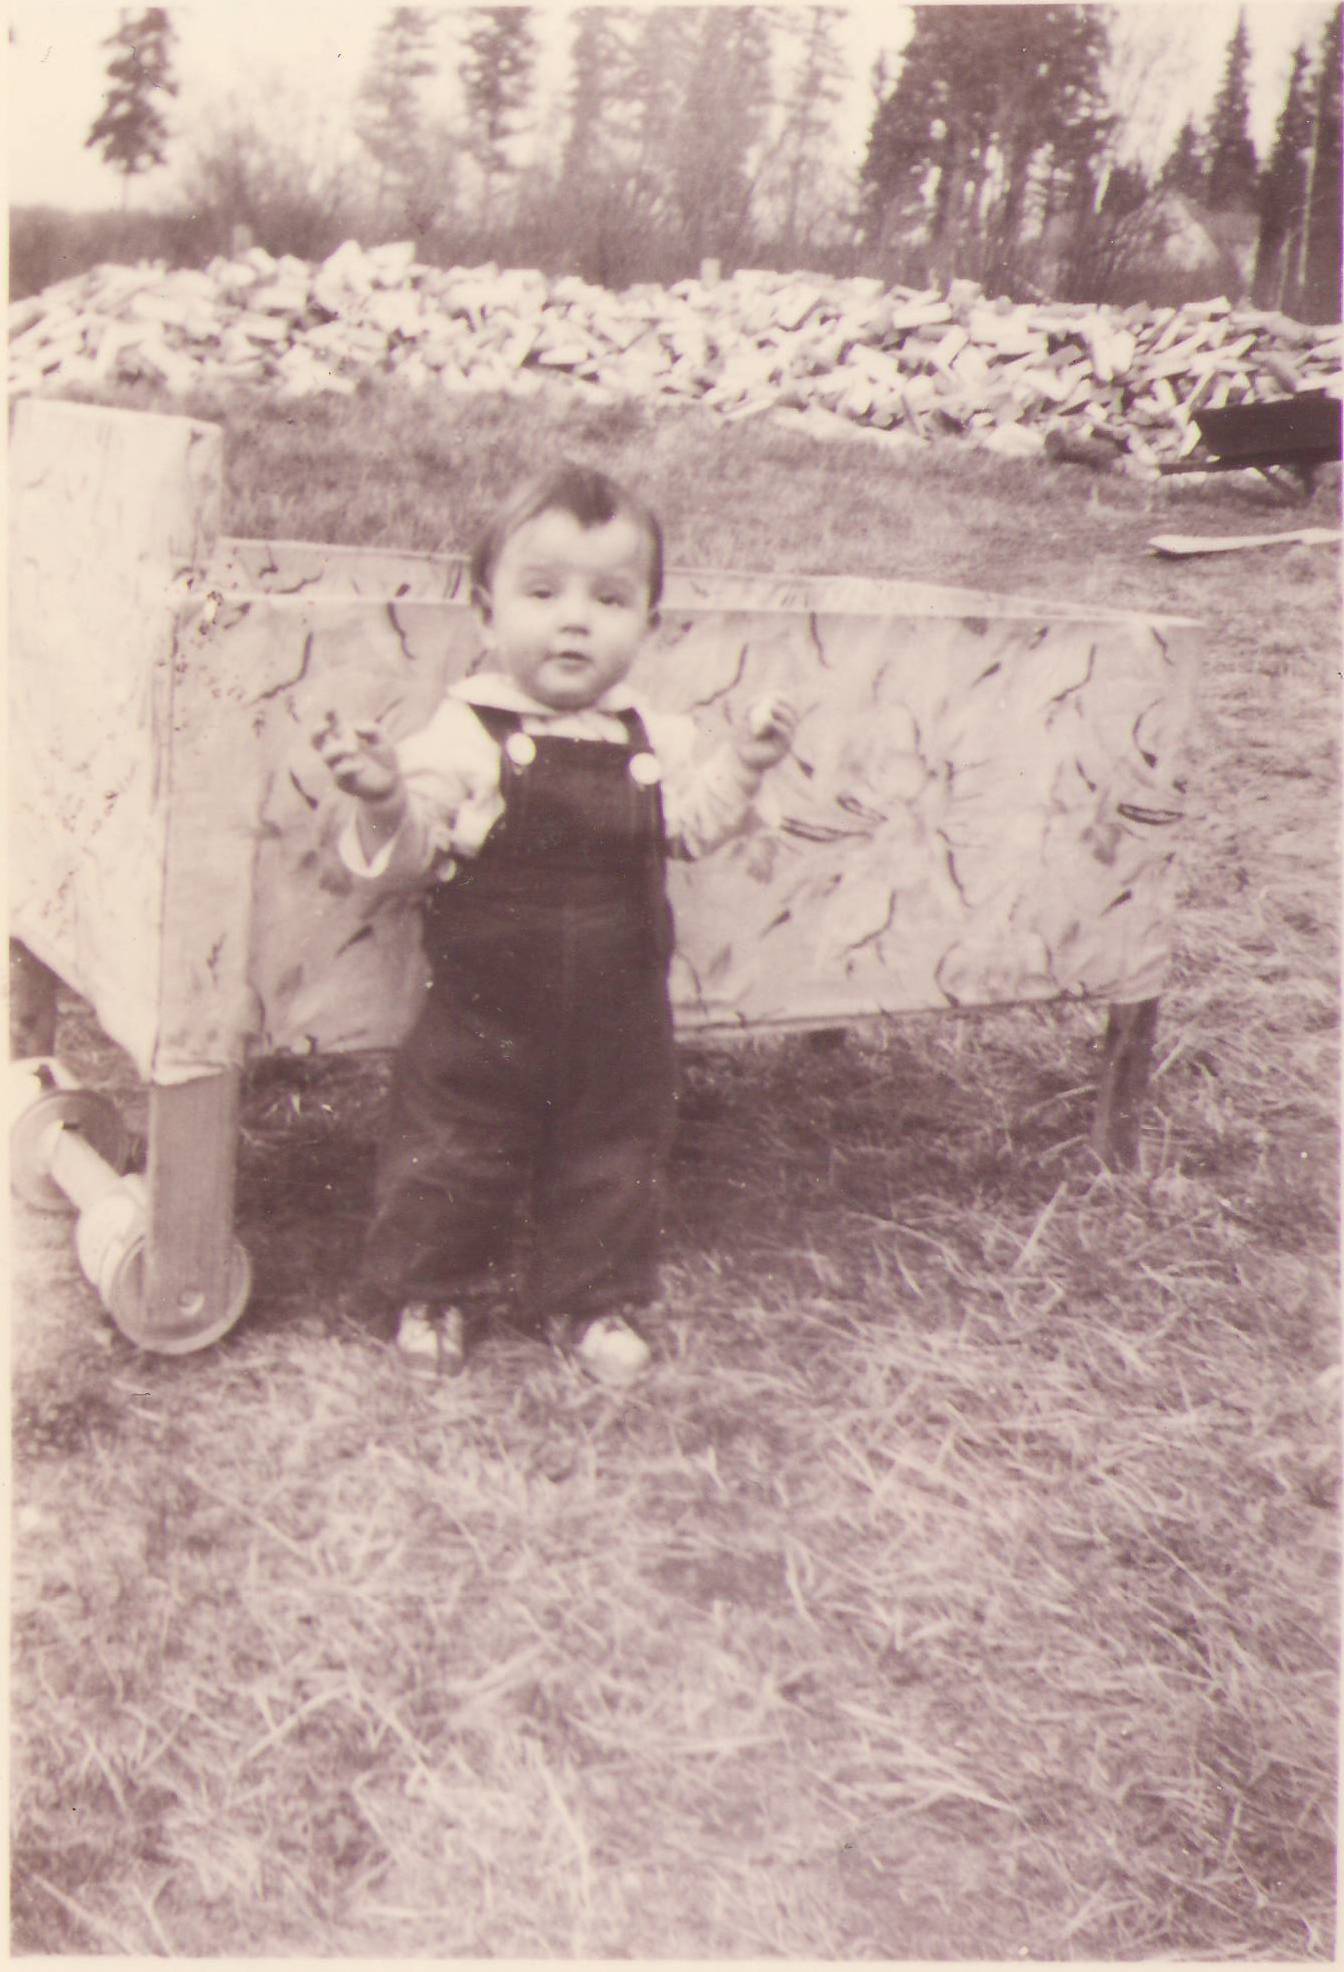 Look how cute this little one is - it appears they have a snack in one hand and attitude in the other! We are also big fans of the wheels made of tin cans on the pram in the back - very creative! Let us know if you recognize who this little one is.
990.4.106.9 / Ward, Vera